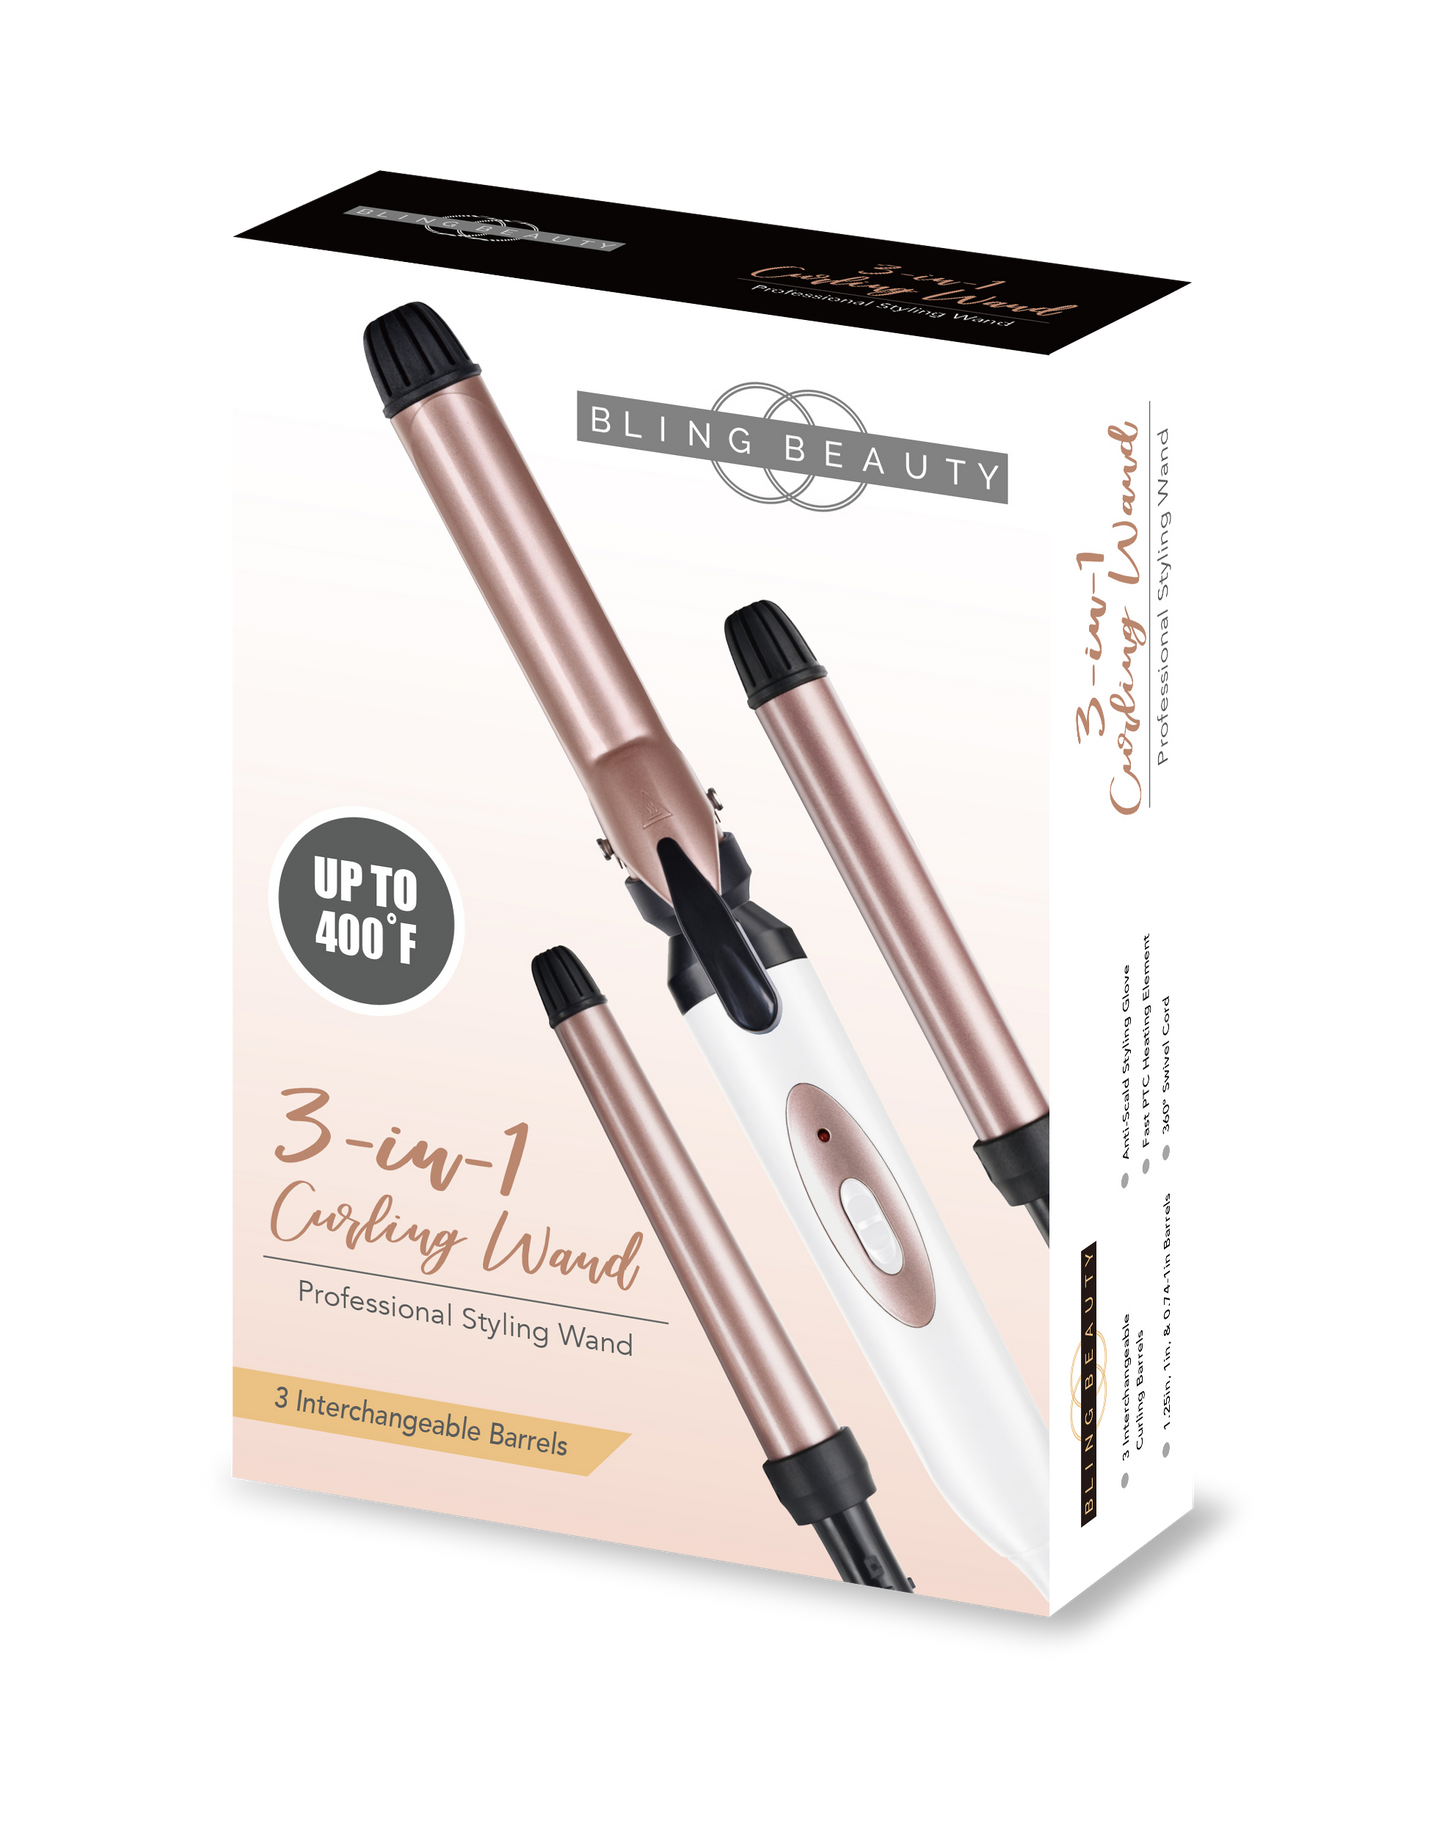 3 in 1 Curling Wand - Professional Styling Wand, Interchangeable Barrels